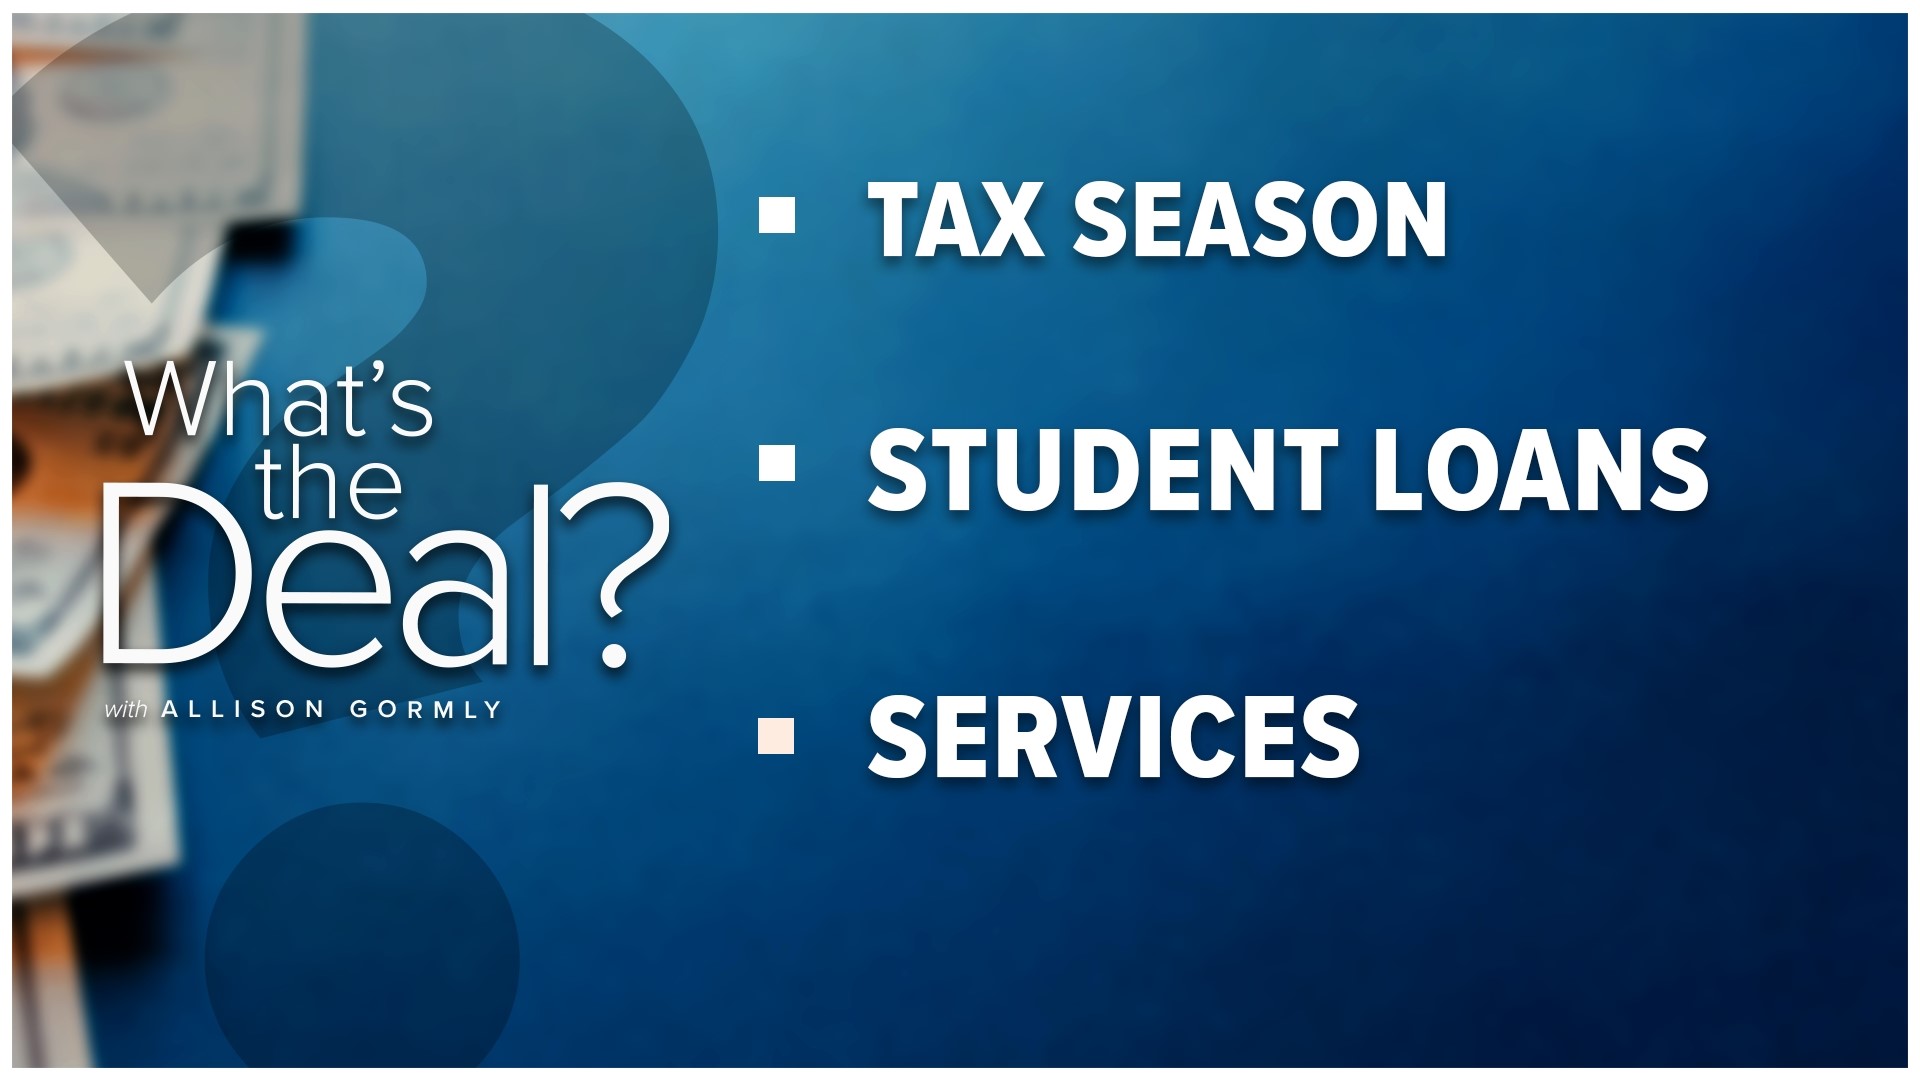 What's the deal with tax season and what you should know about filing, plus changes to student loan payments and how to save on services like haircuts.